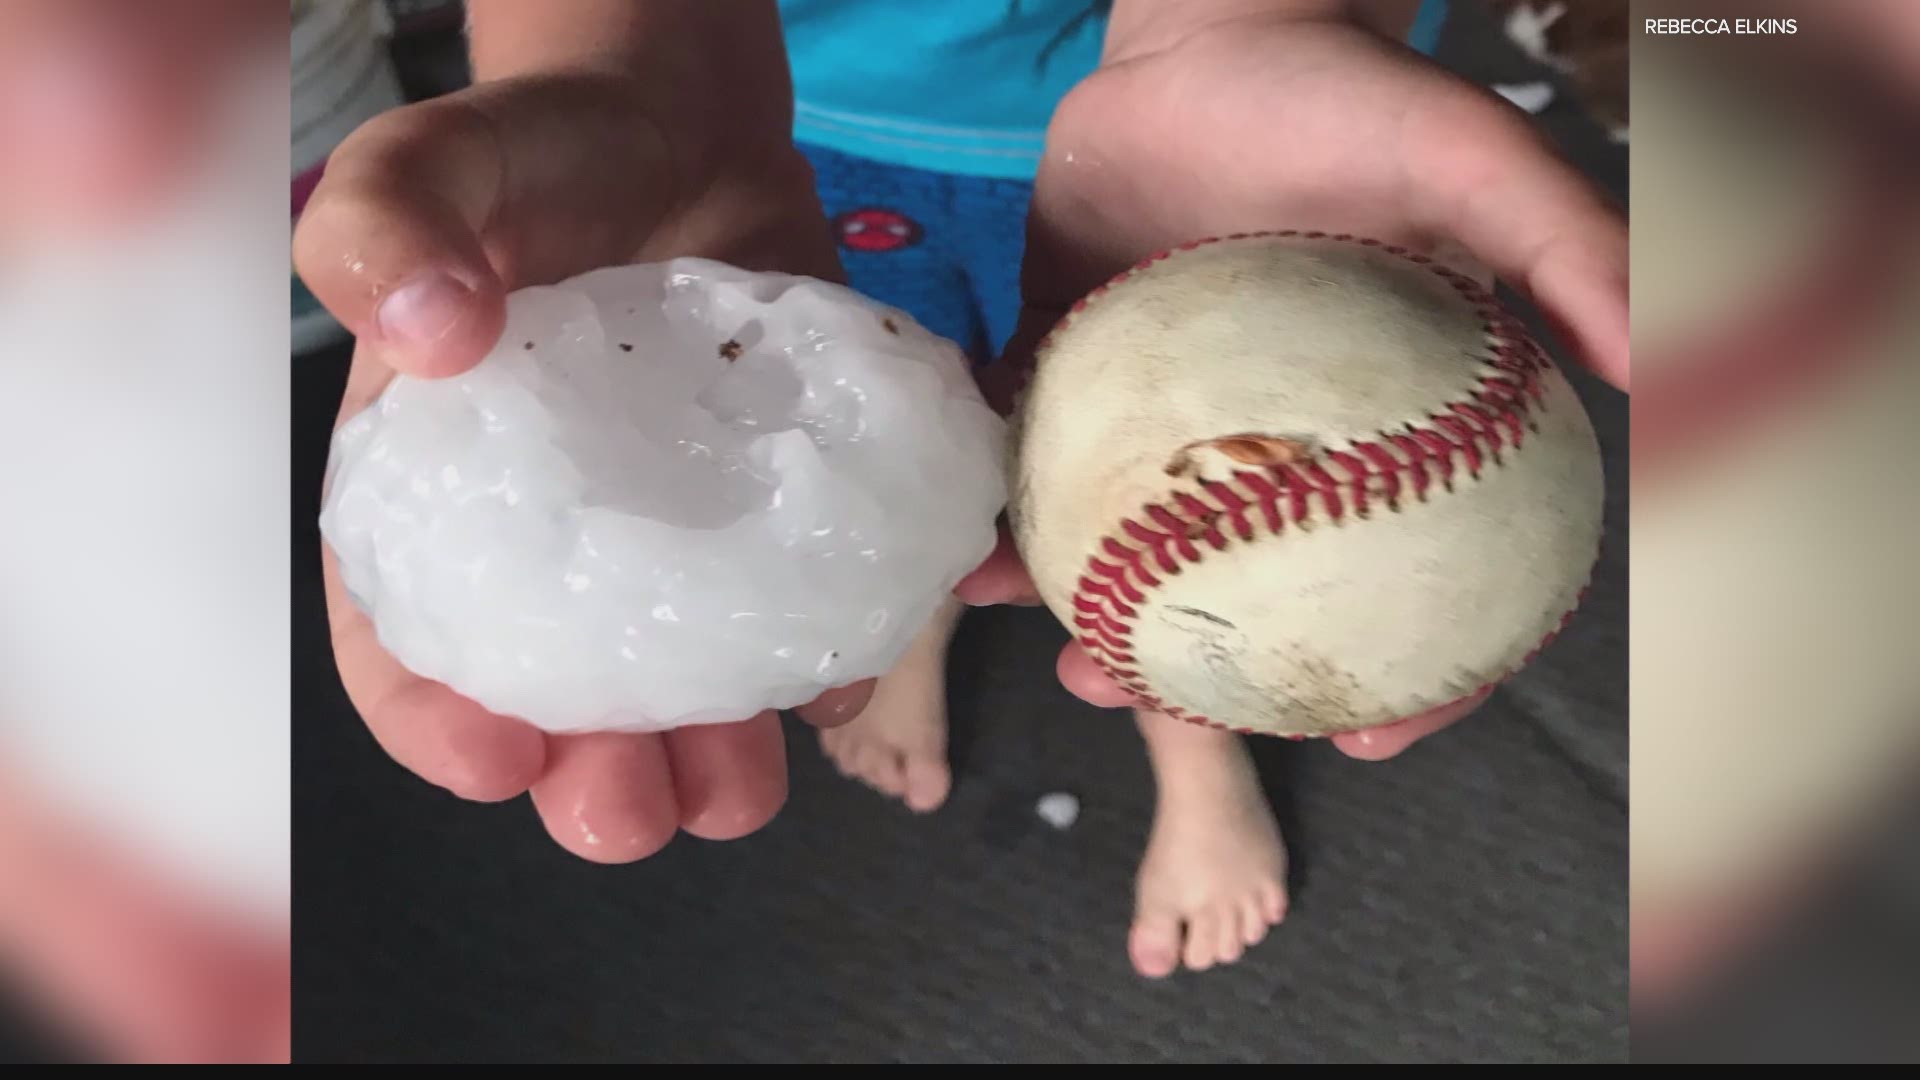 Hoosiers experienced baseball-sized hail as storms moved through the area.